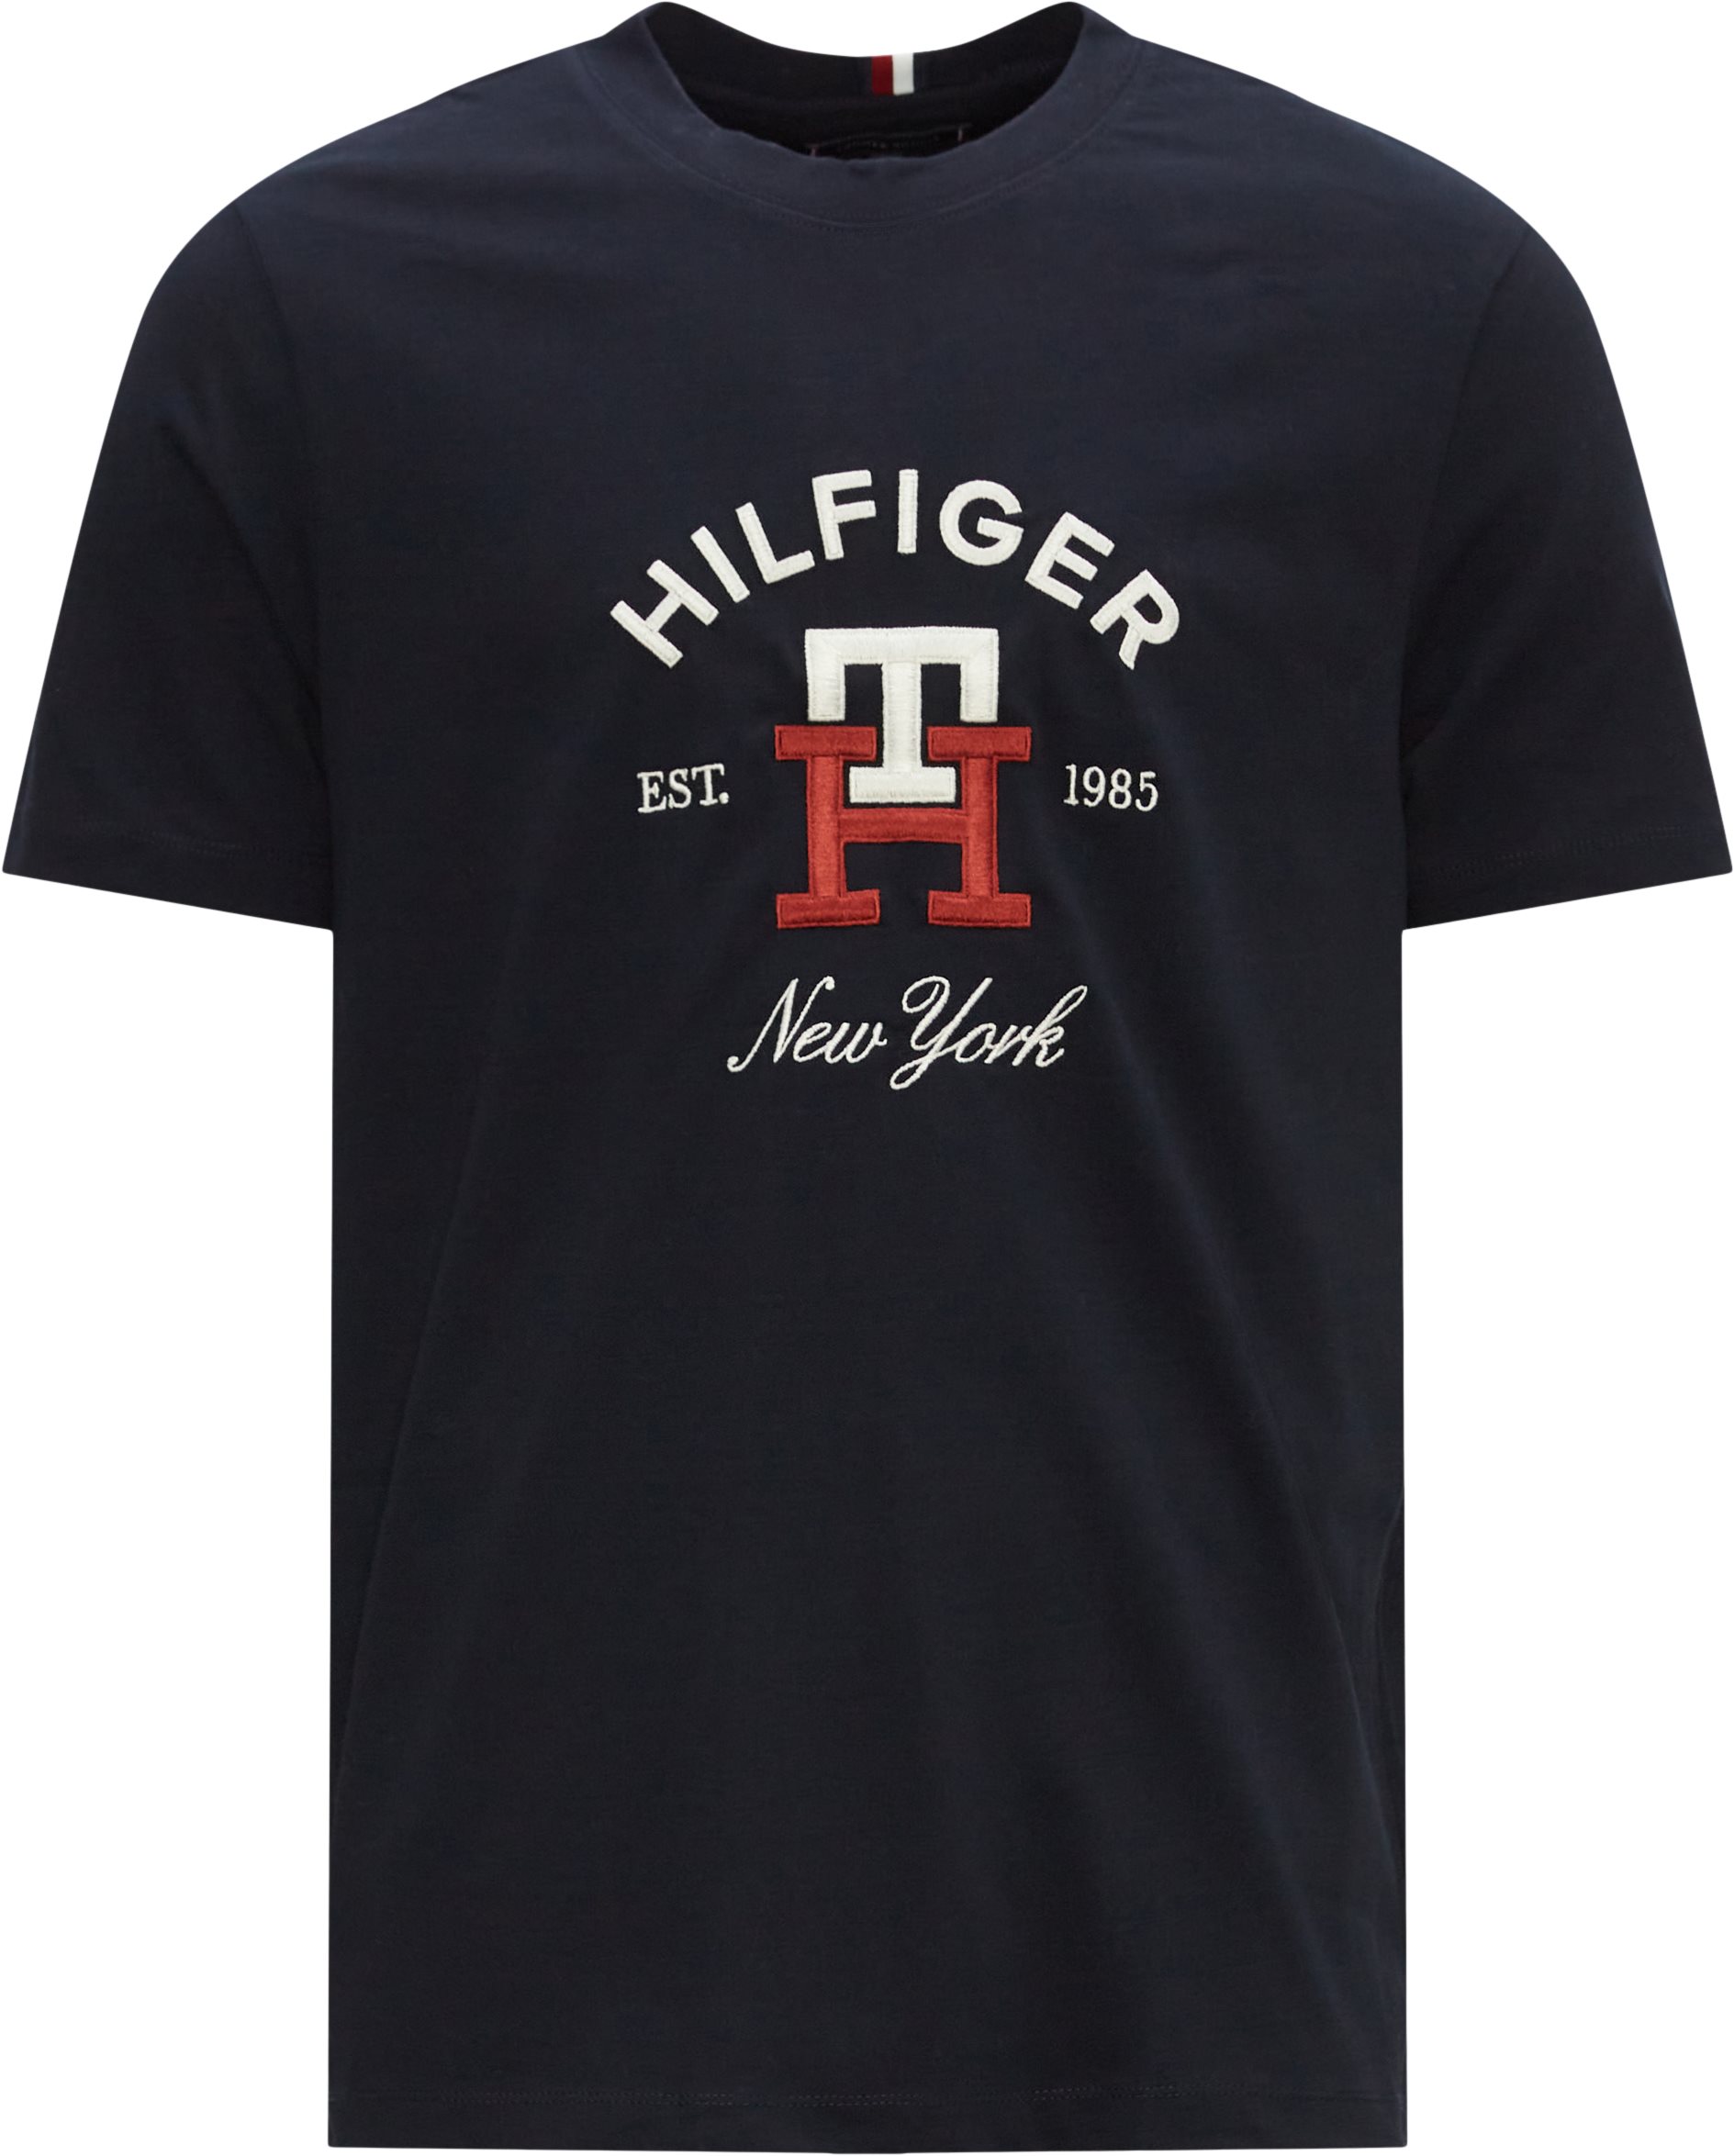 30043 CURVED MONOGRAM TEE 40 T-shirts EUR from Hilfiger Tommy NAVY